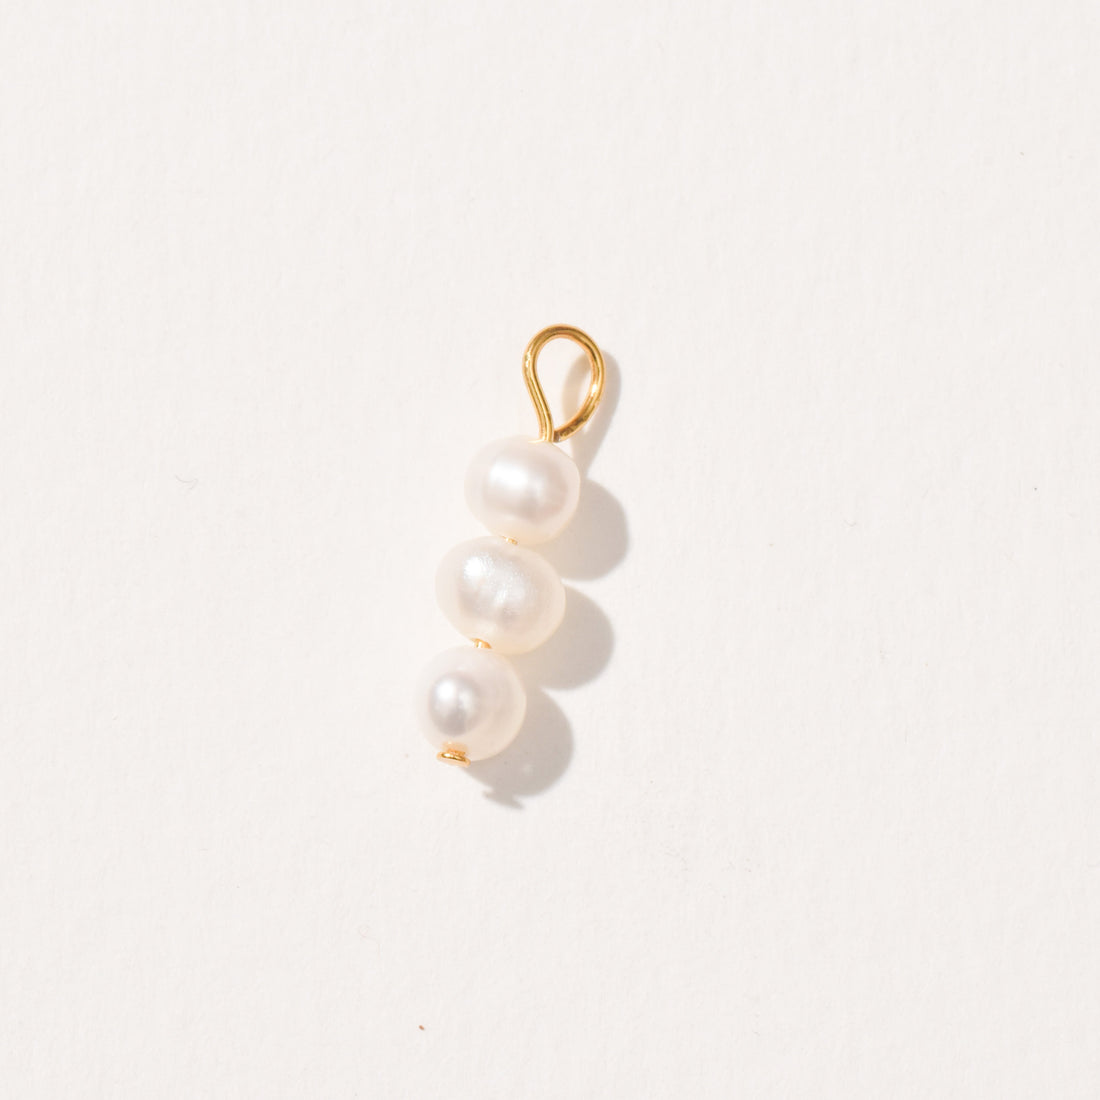 The Feather Pearl Charm